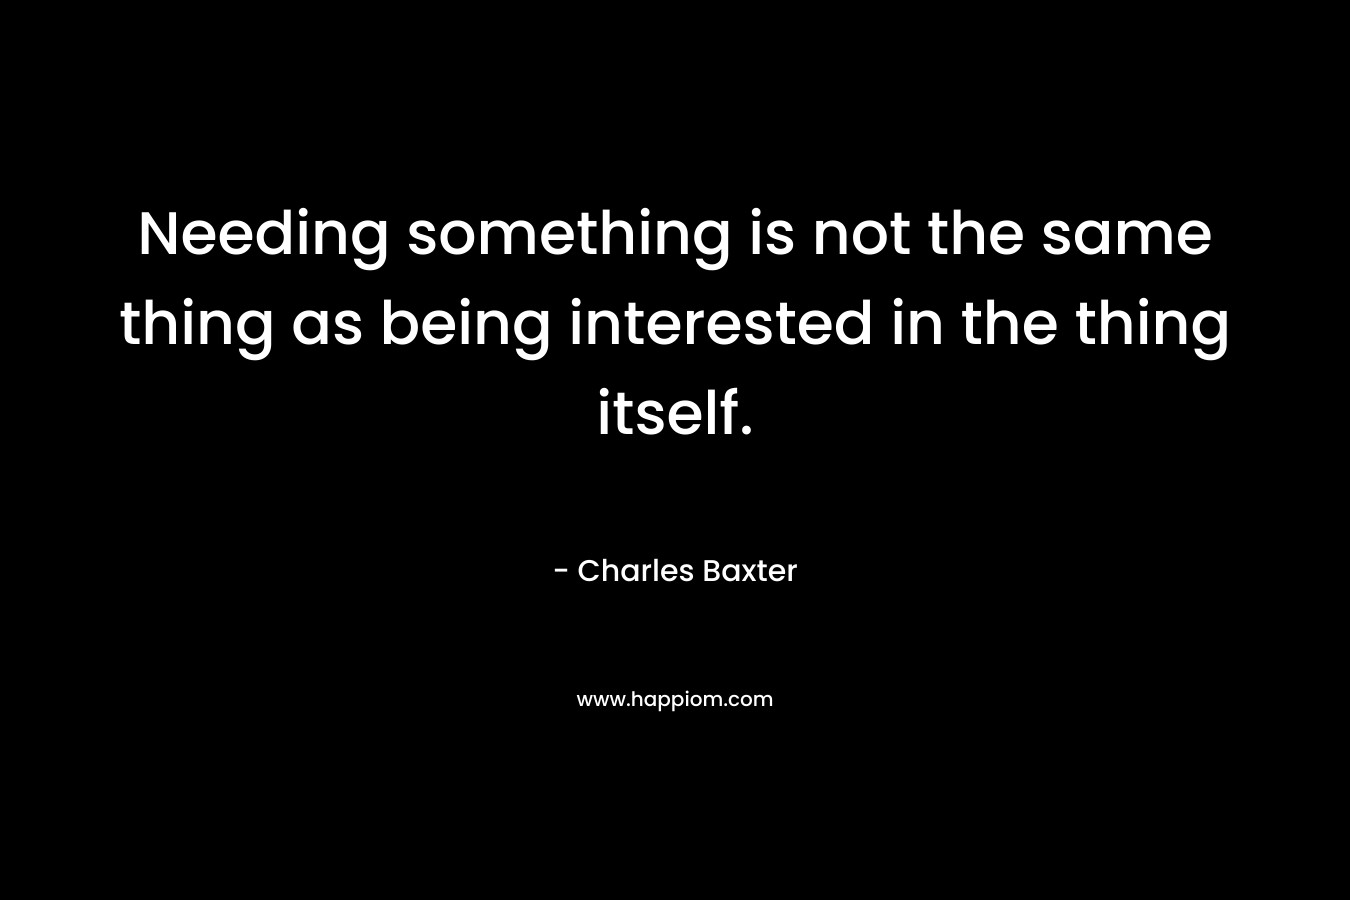 Needing something is not the same thing as being interested in the thing itself. – Charles Baxter